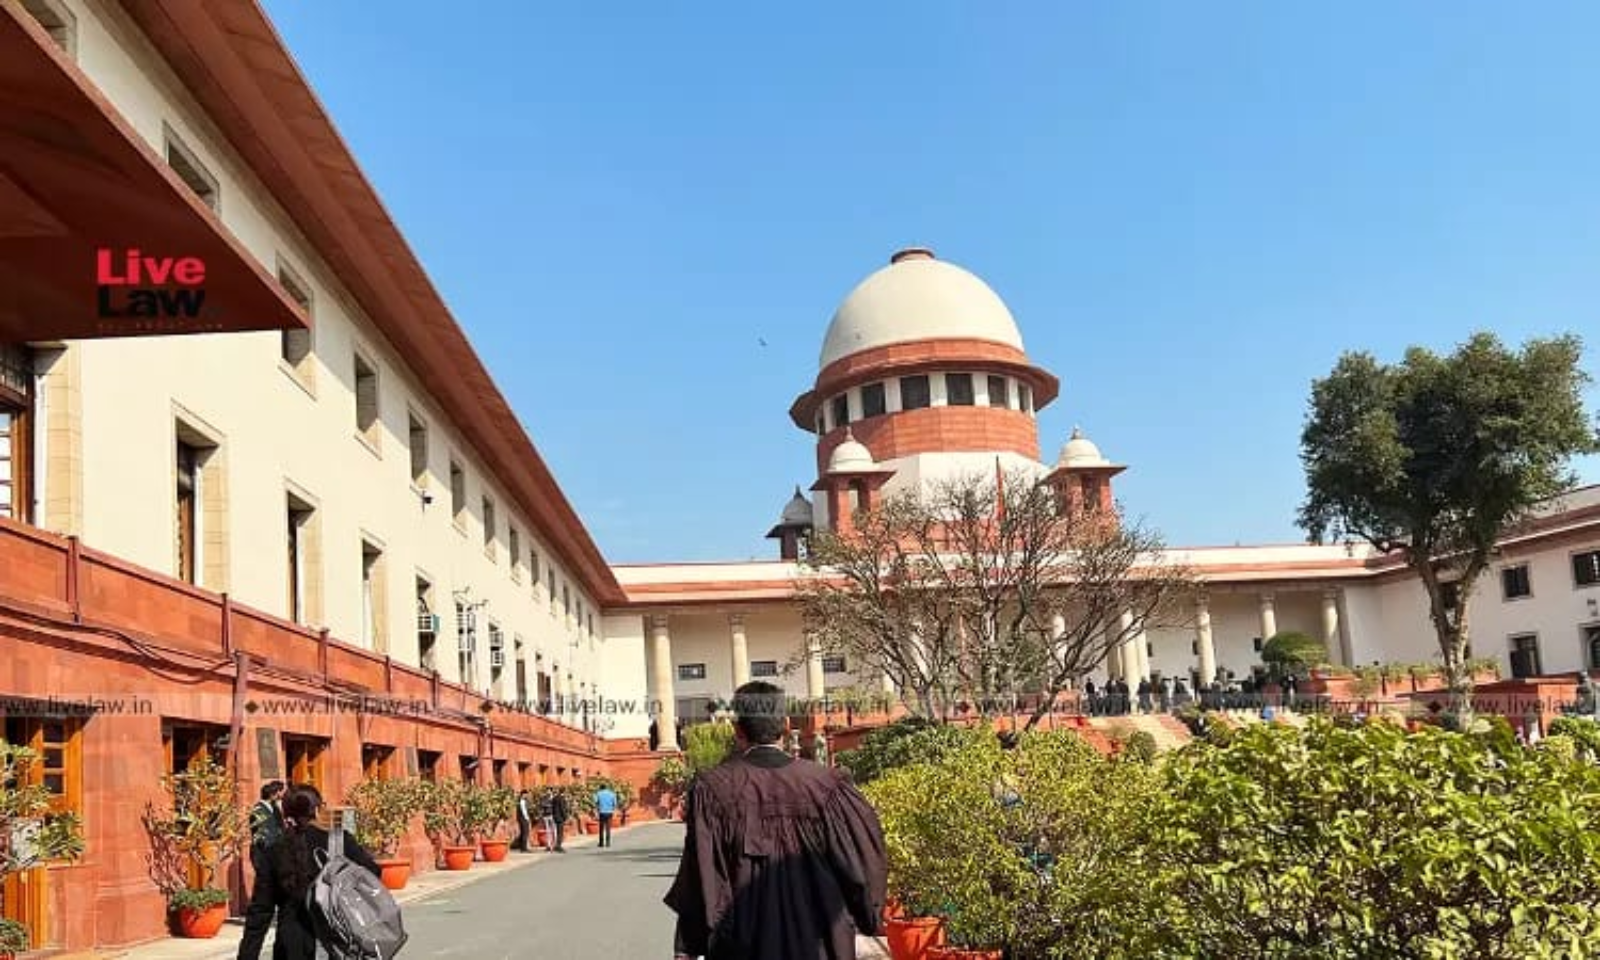 Reap Hd Sex Video Dowland - Substantial Progress Made To Prevent Circulation Of Child Porn, Rape Videos  On Social Media': Supreme Court Closes PIL